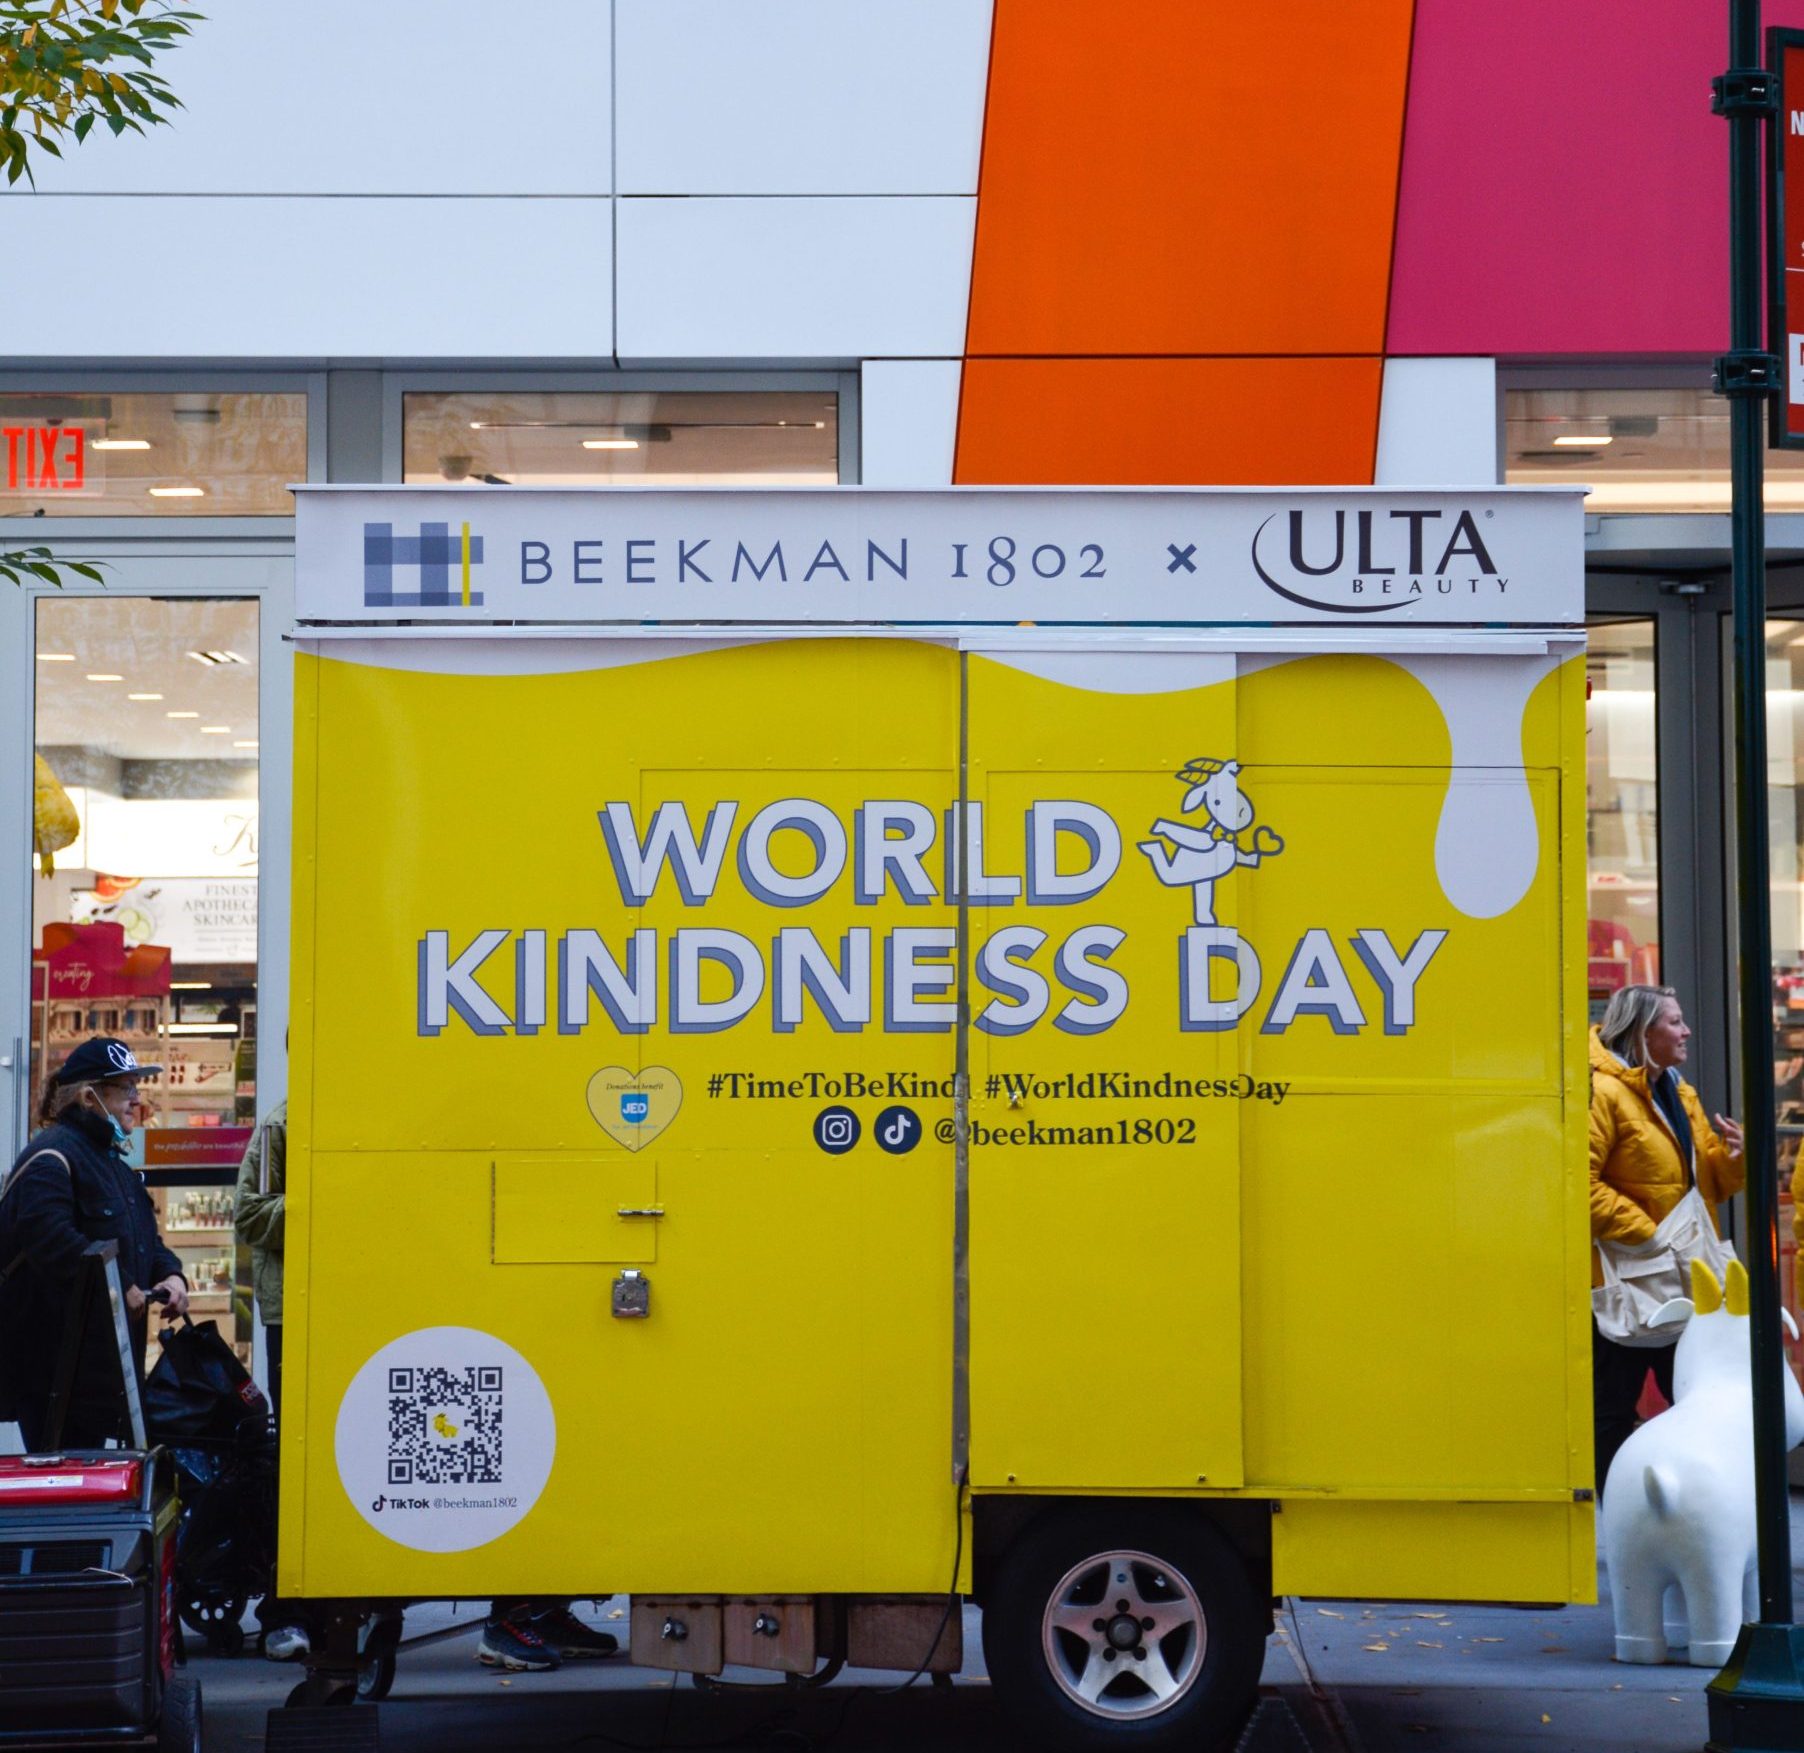 World Kindness Day promotion for Beekman 1802.